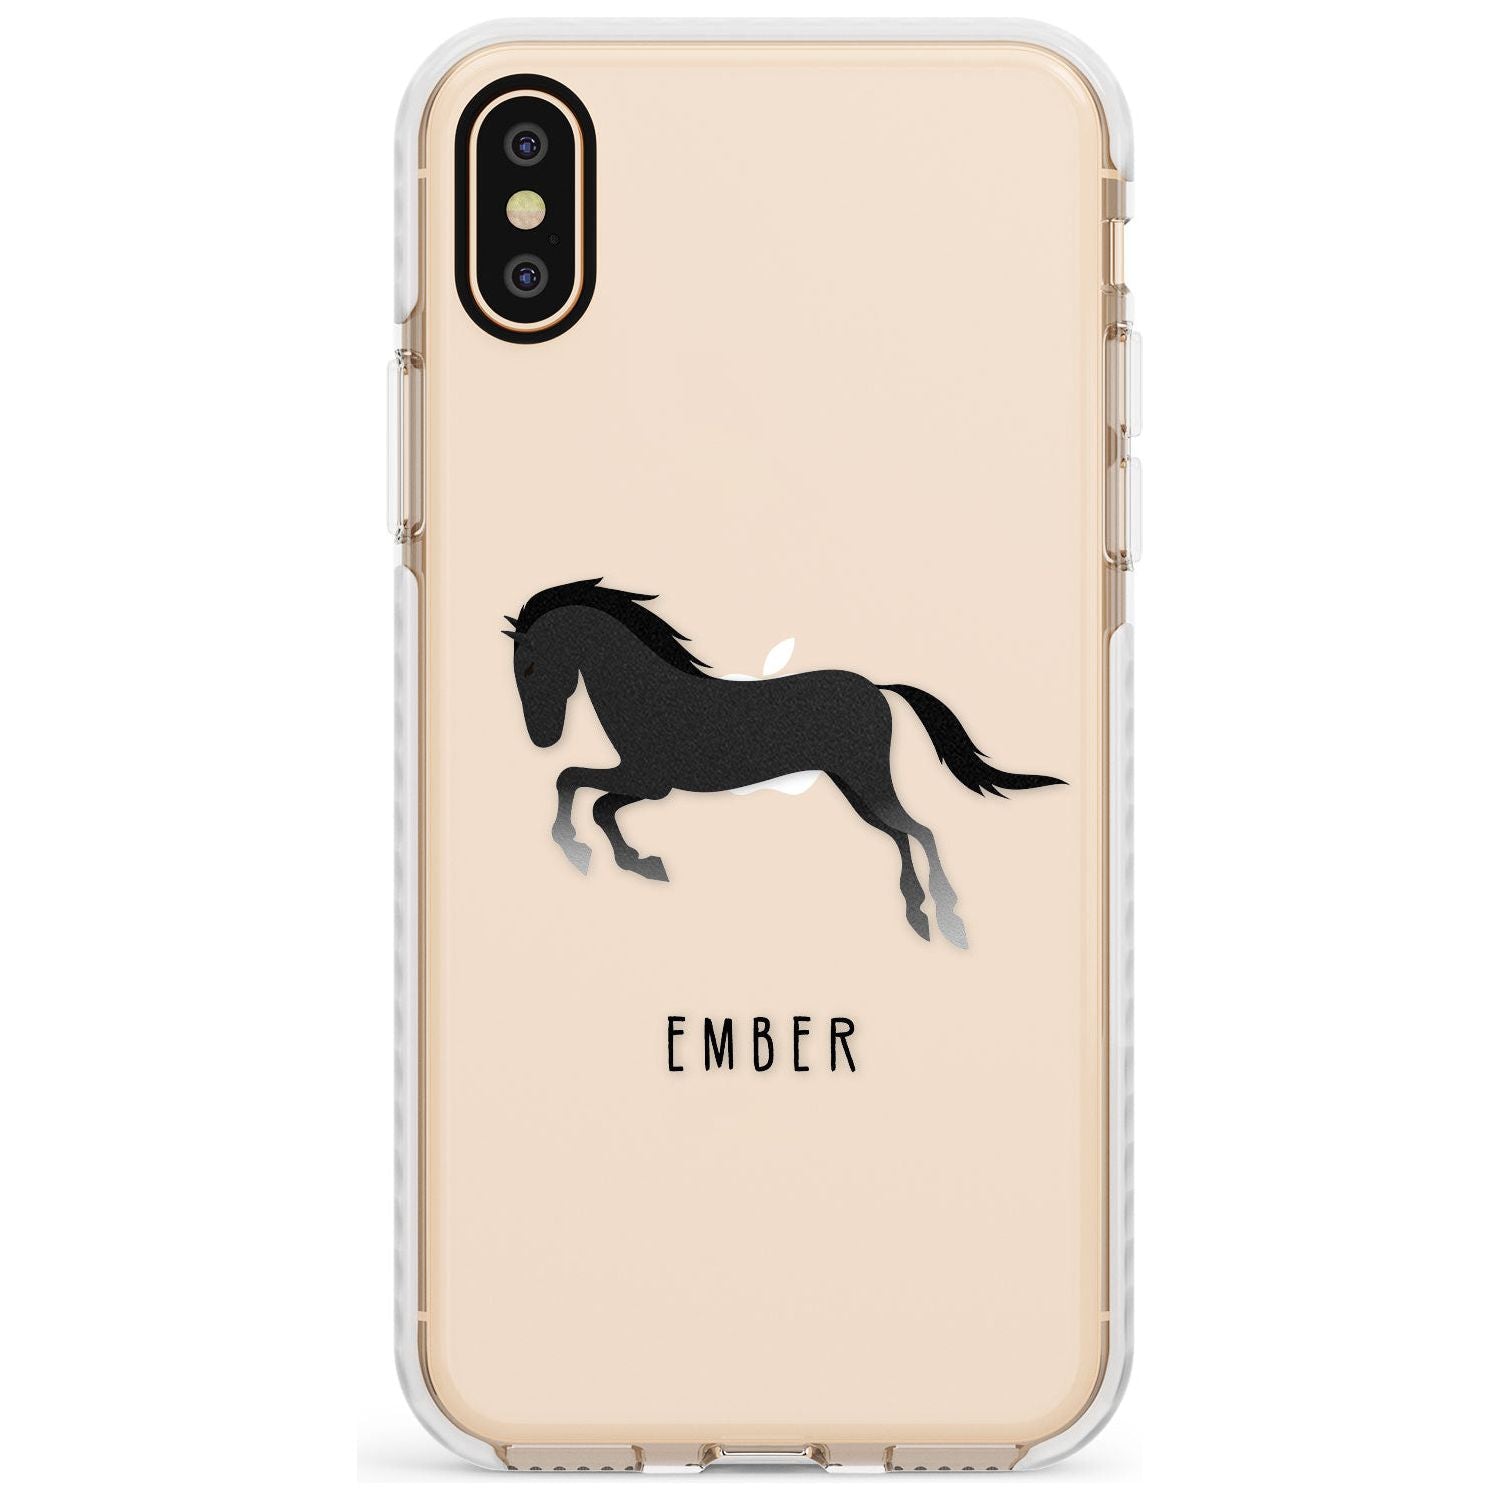 Personalised Black Horse Impact Phone Case for iPhone X XS Max XR